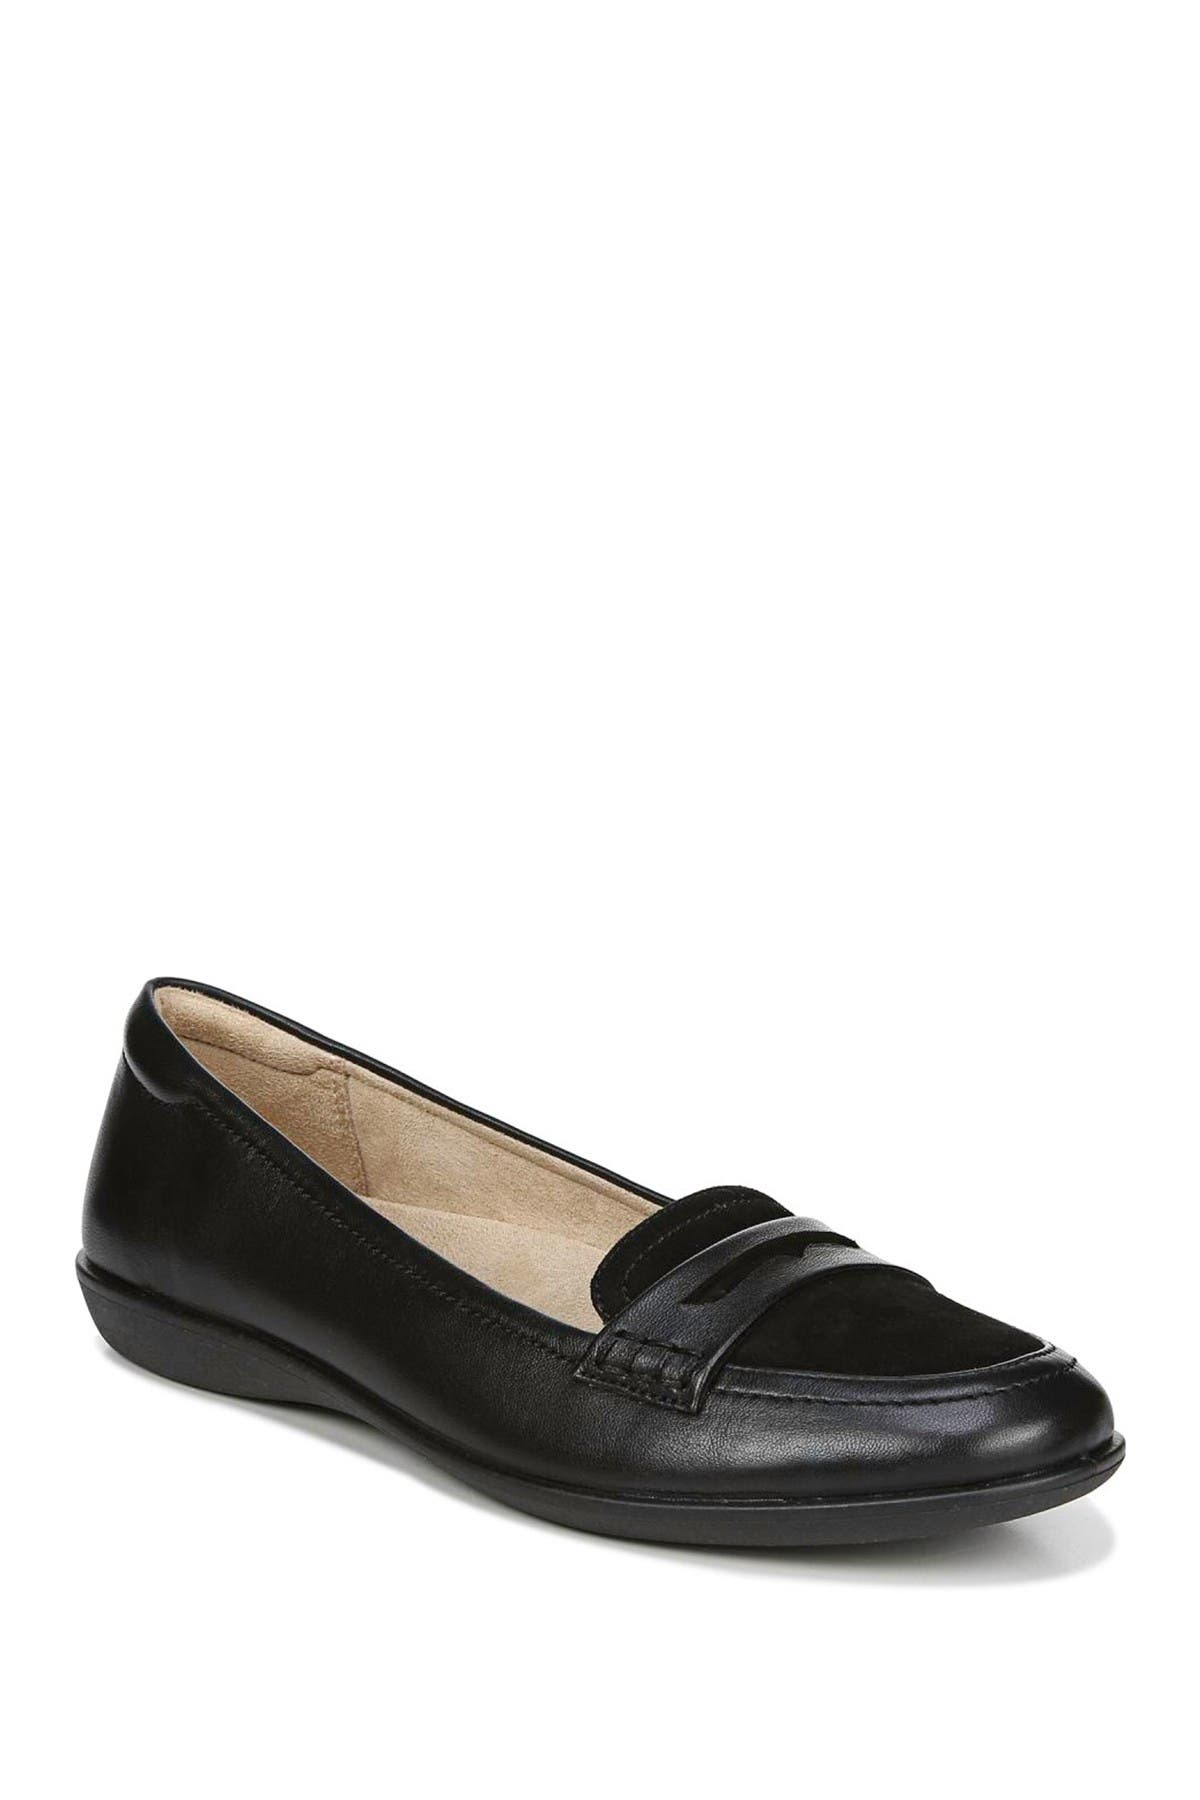 Naturalizer | Finley Leather Loafer 